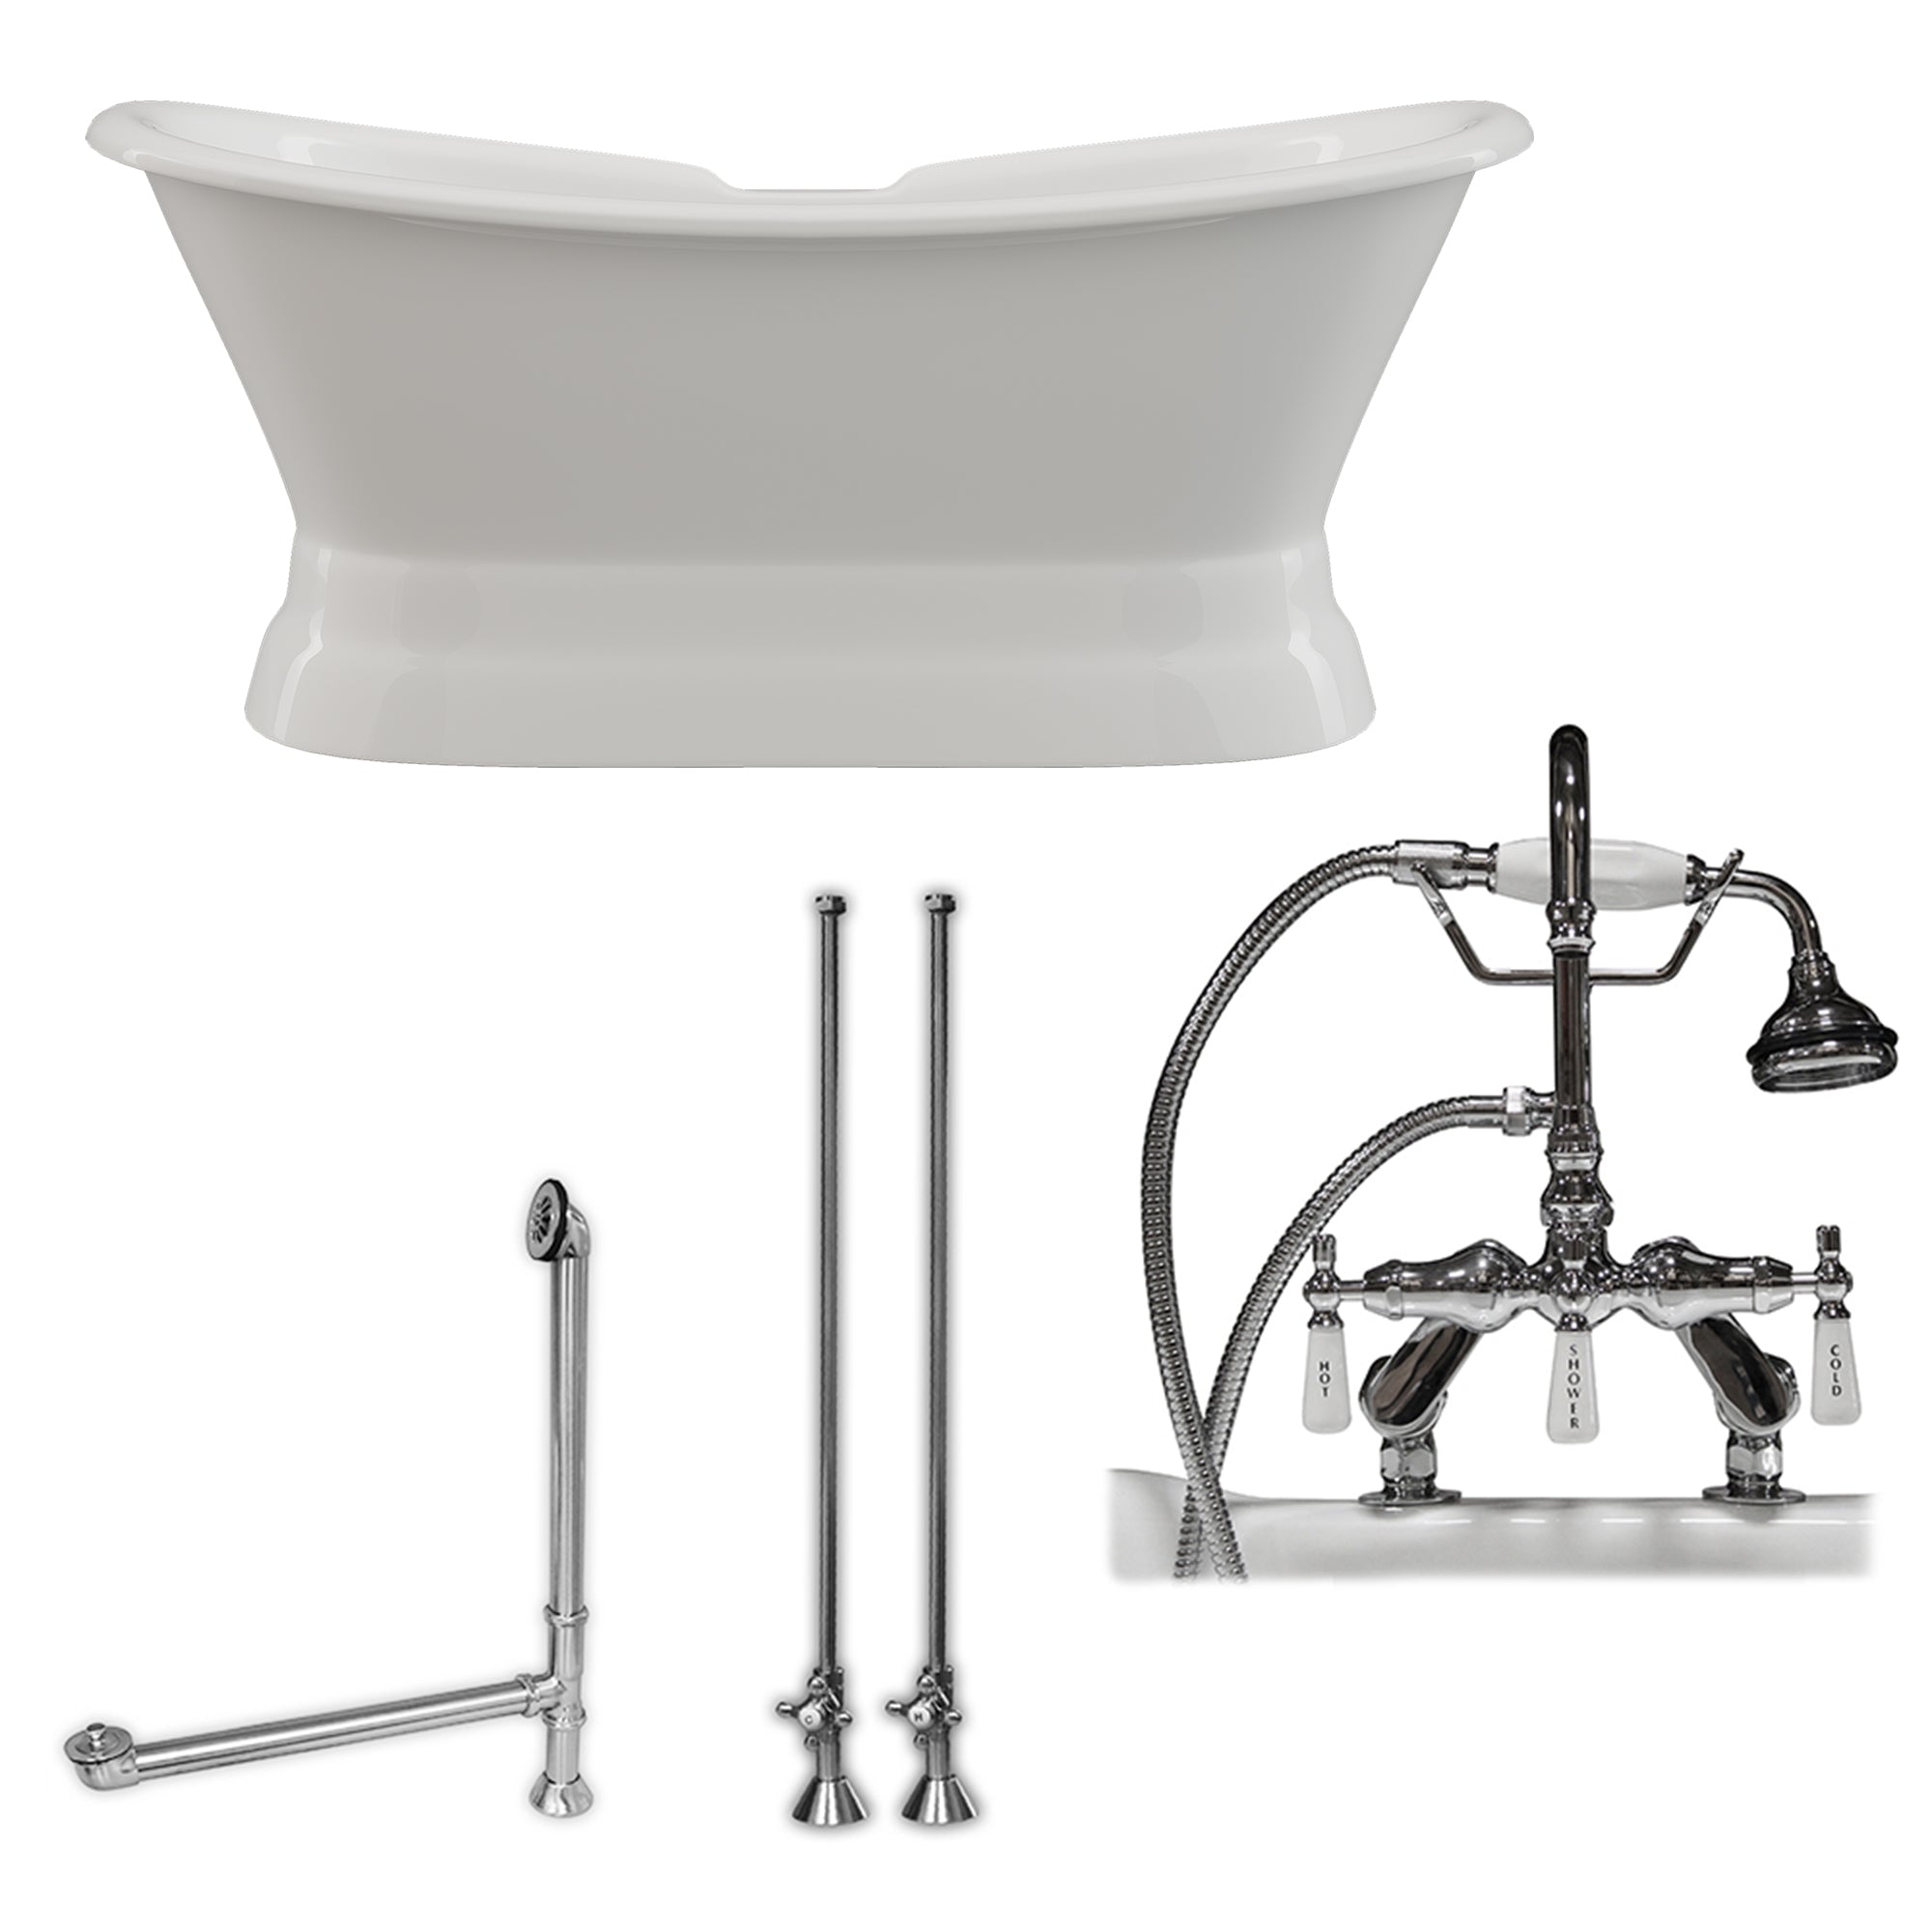 Cambridge Plumbing Double Slipper Cast Iron Pedestal Soaking Tub (Porcelain interior and white paint exterior) and Deck Mount Plumbing Package (Brushed nickel) DES-PED-684D-PKG-7DH - Vital Hydrotherapy